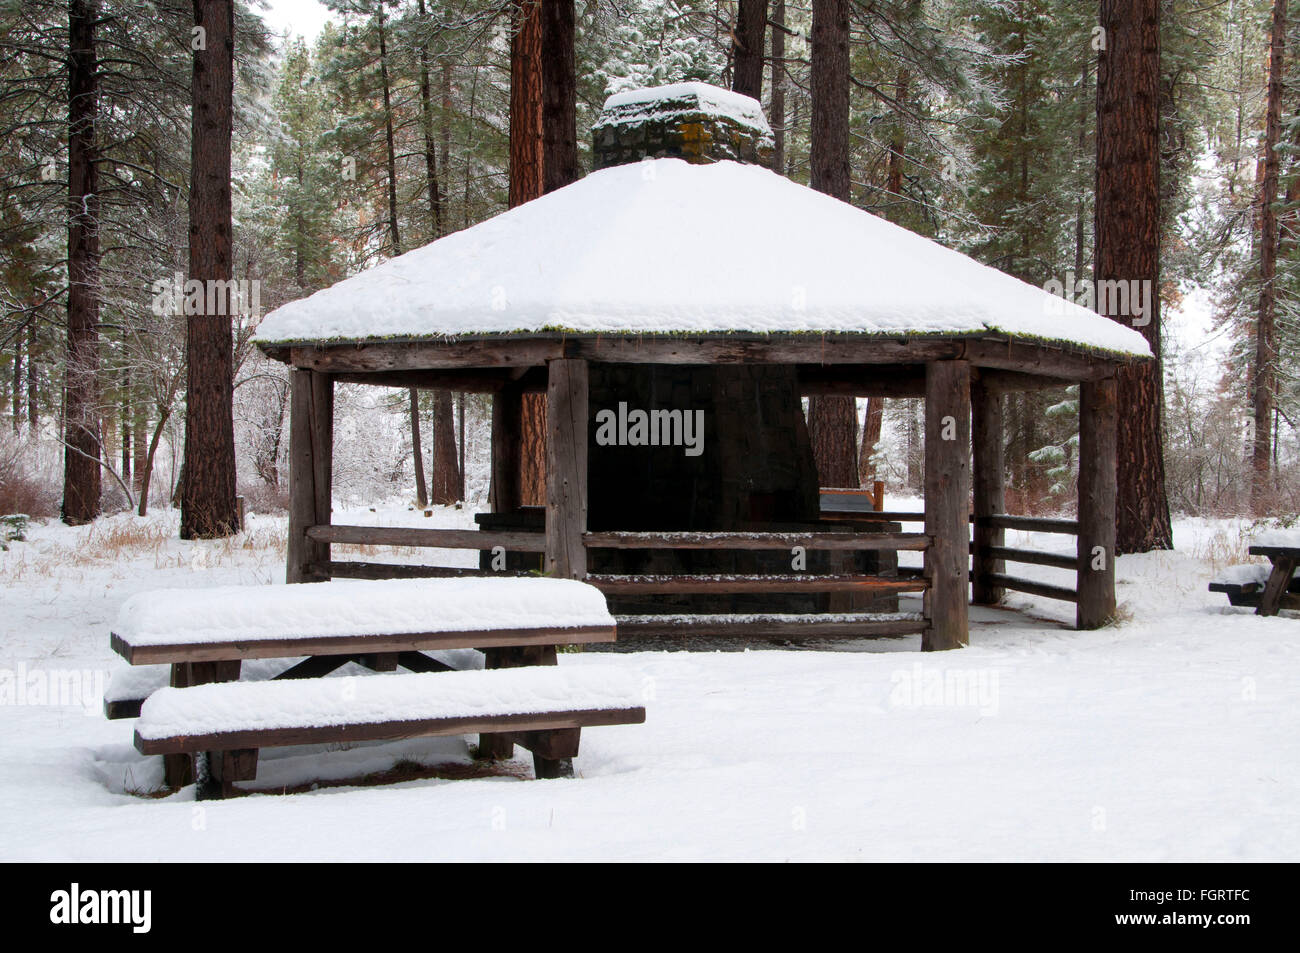 Civilian Conservation Corps (CCC) picnic shelter at Camp Sherman Campground, Deschutes National Forest, Oregon Stock Photo